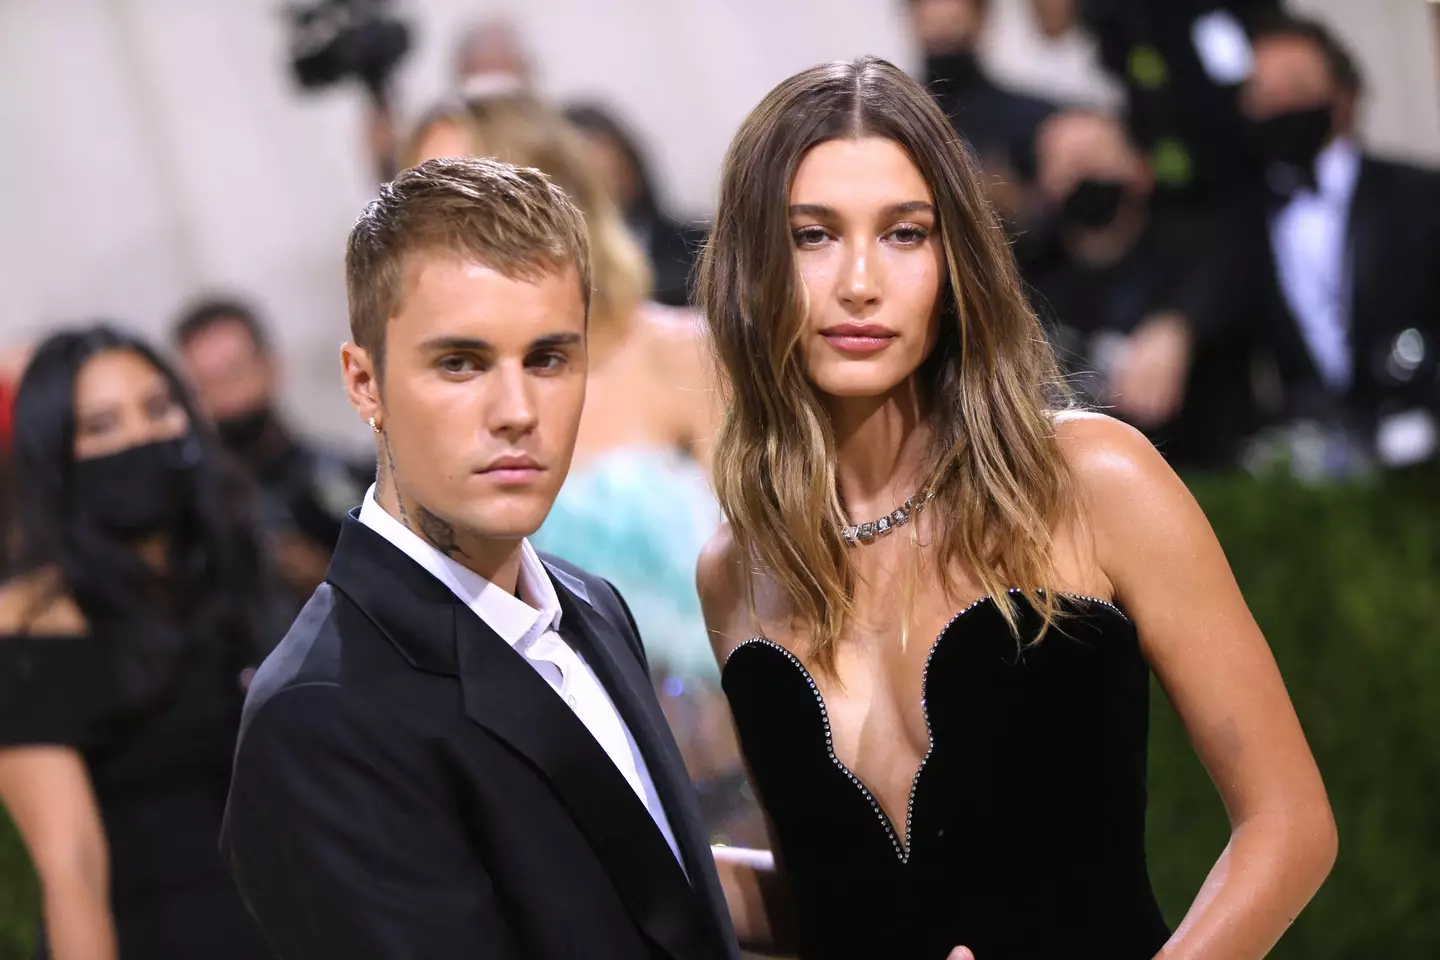 Justin reportedly started dating Hailey just a few months after his split with Selena.